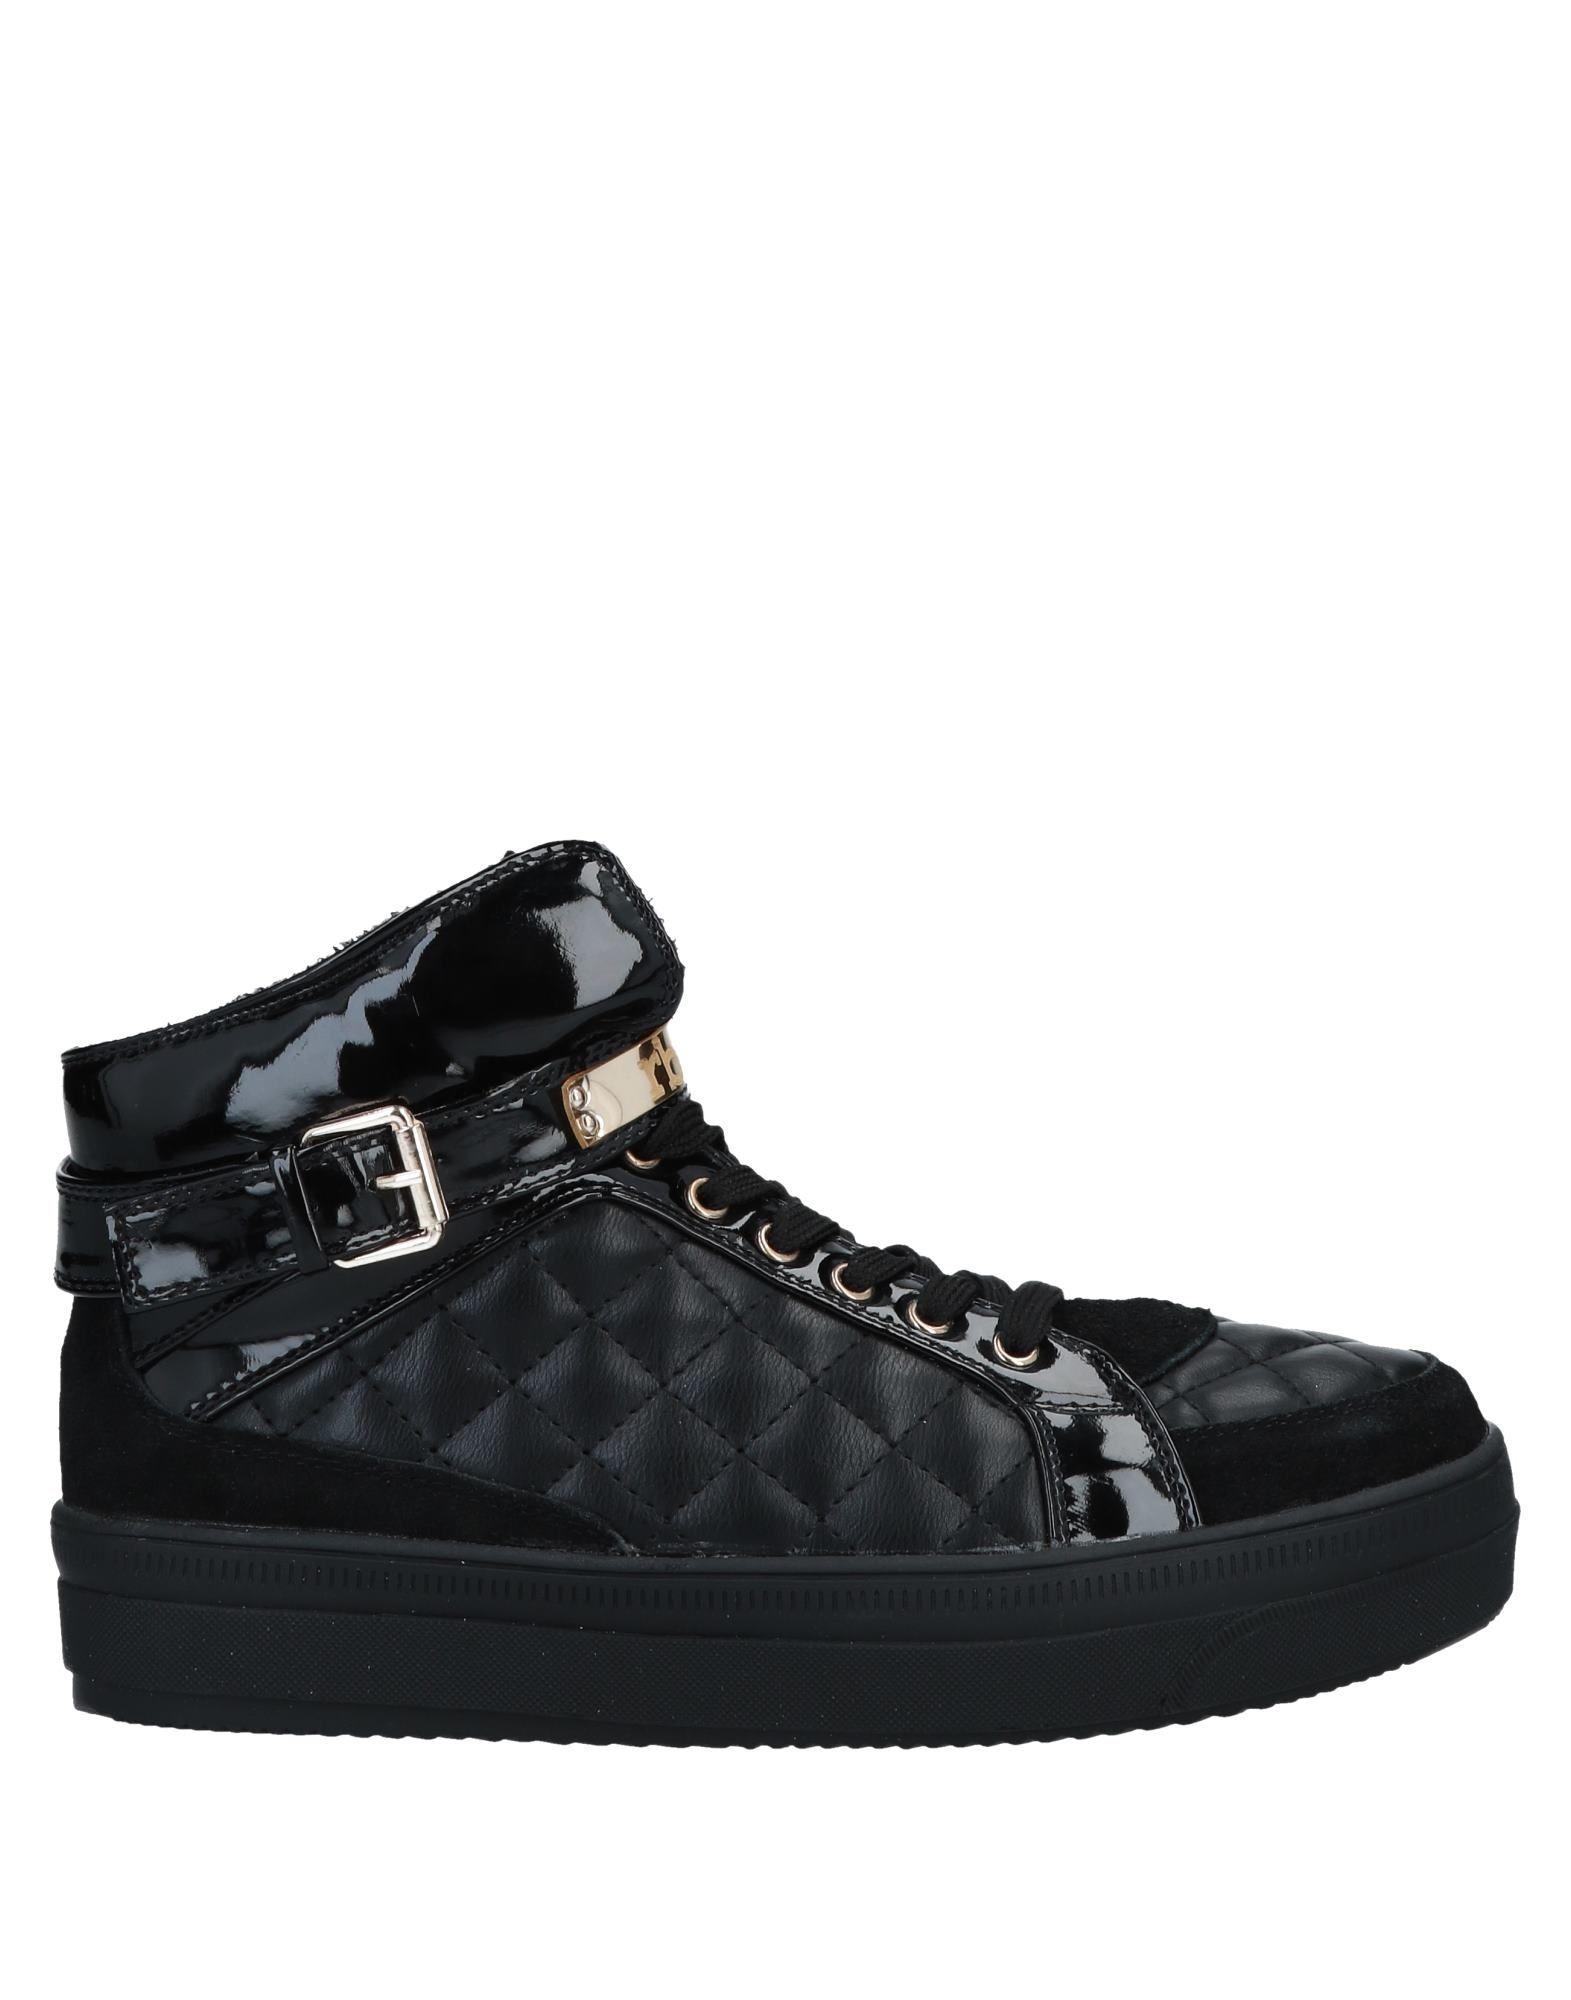 Roccobarocco Leather High-tops & Sneakers in Black - Lyst